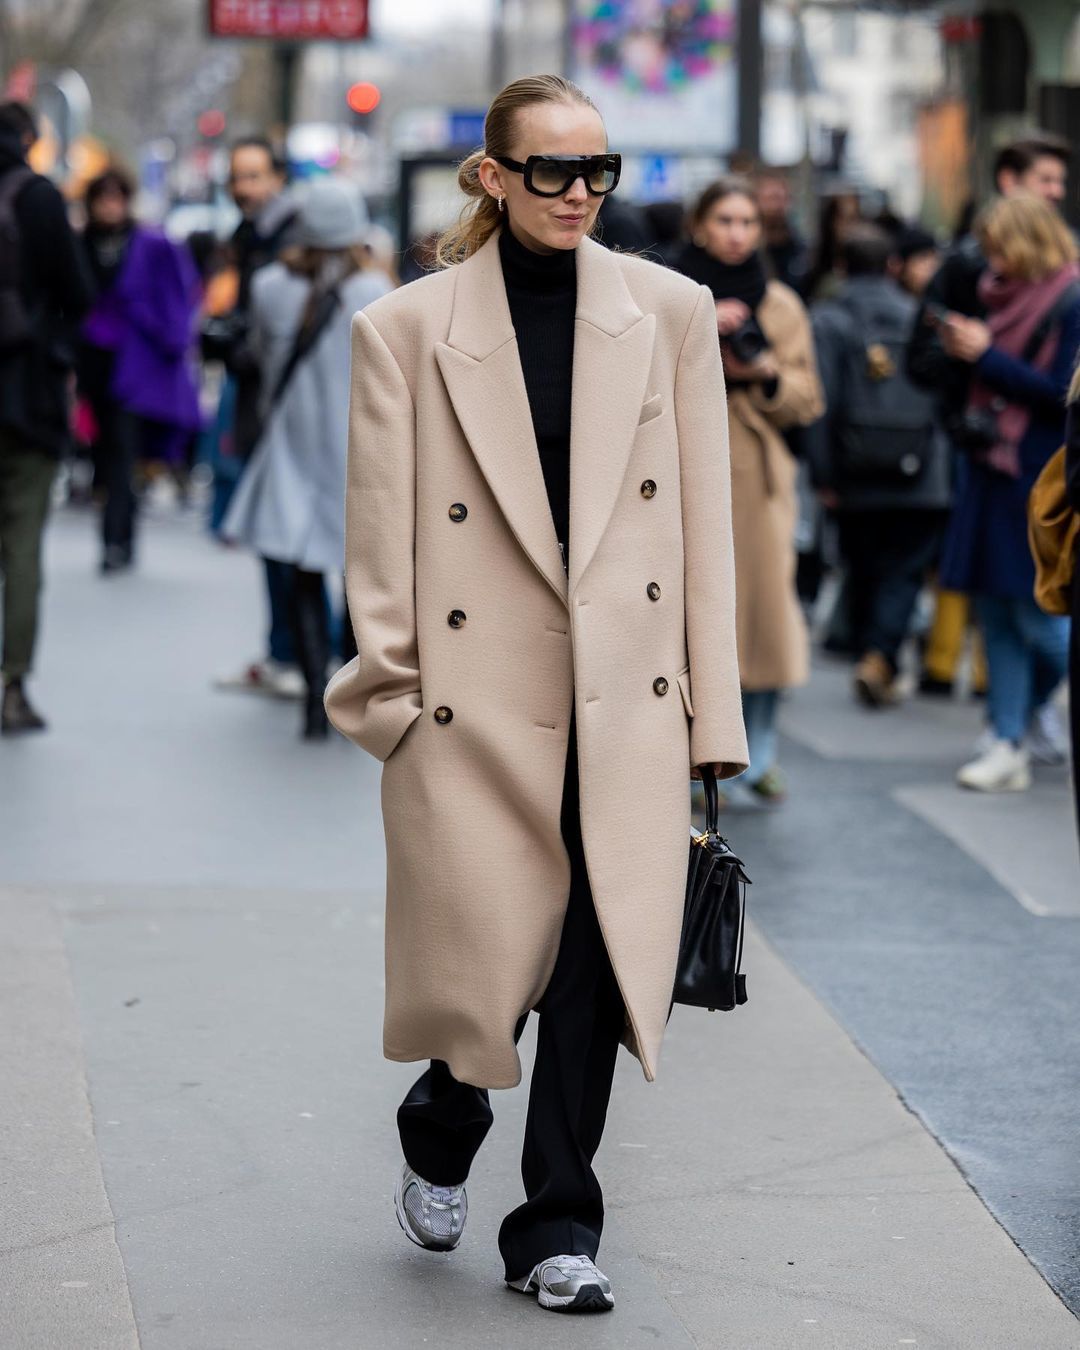 Stylish top: coats, jackets and trench coats in autumn looks 6